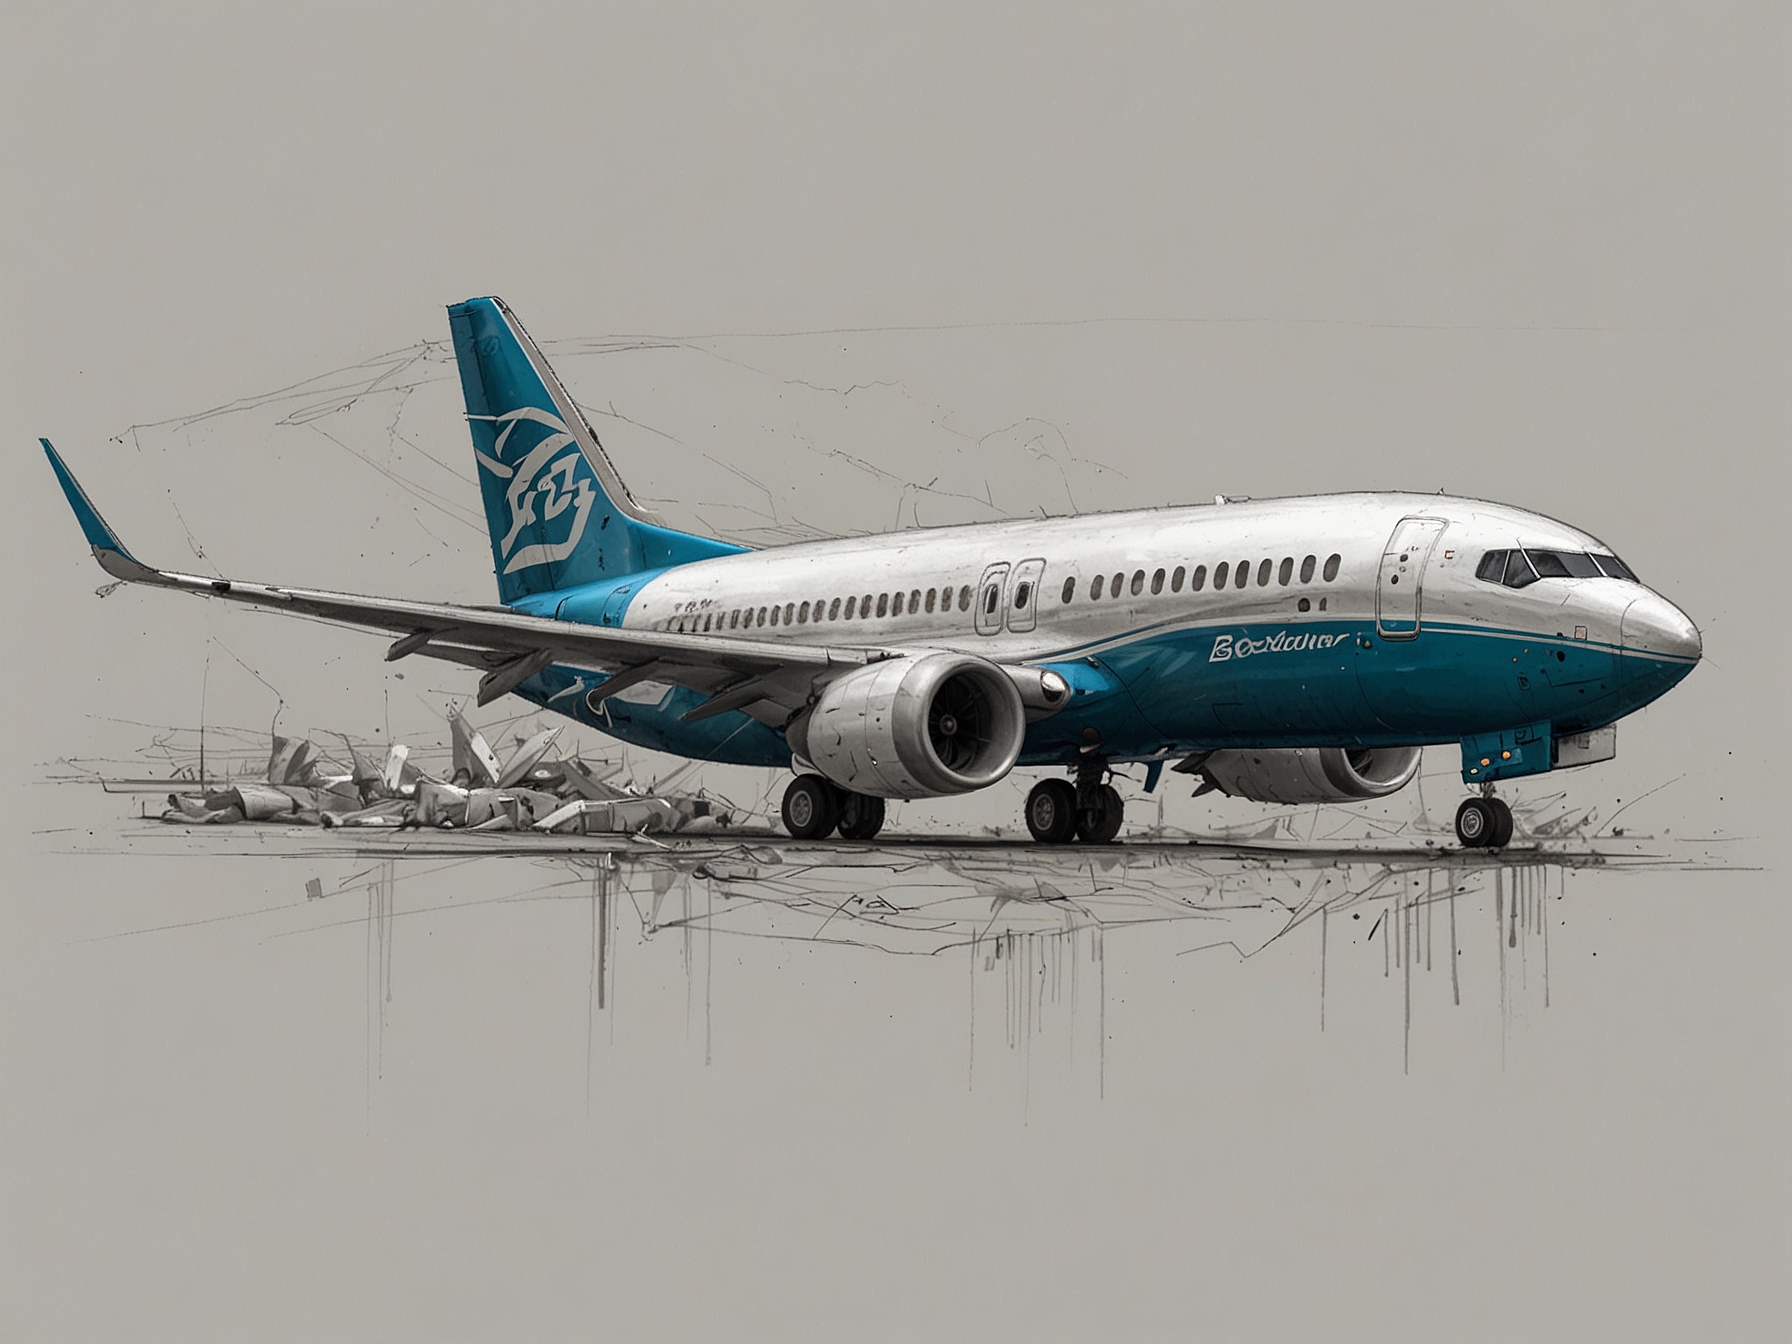 An image depicting a Boeing 737 Max aircraft, symbolizing the model involved in the fatal crashes that led to the legal actions and intense scrutiny on Boeing.